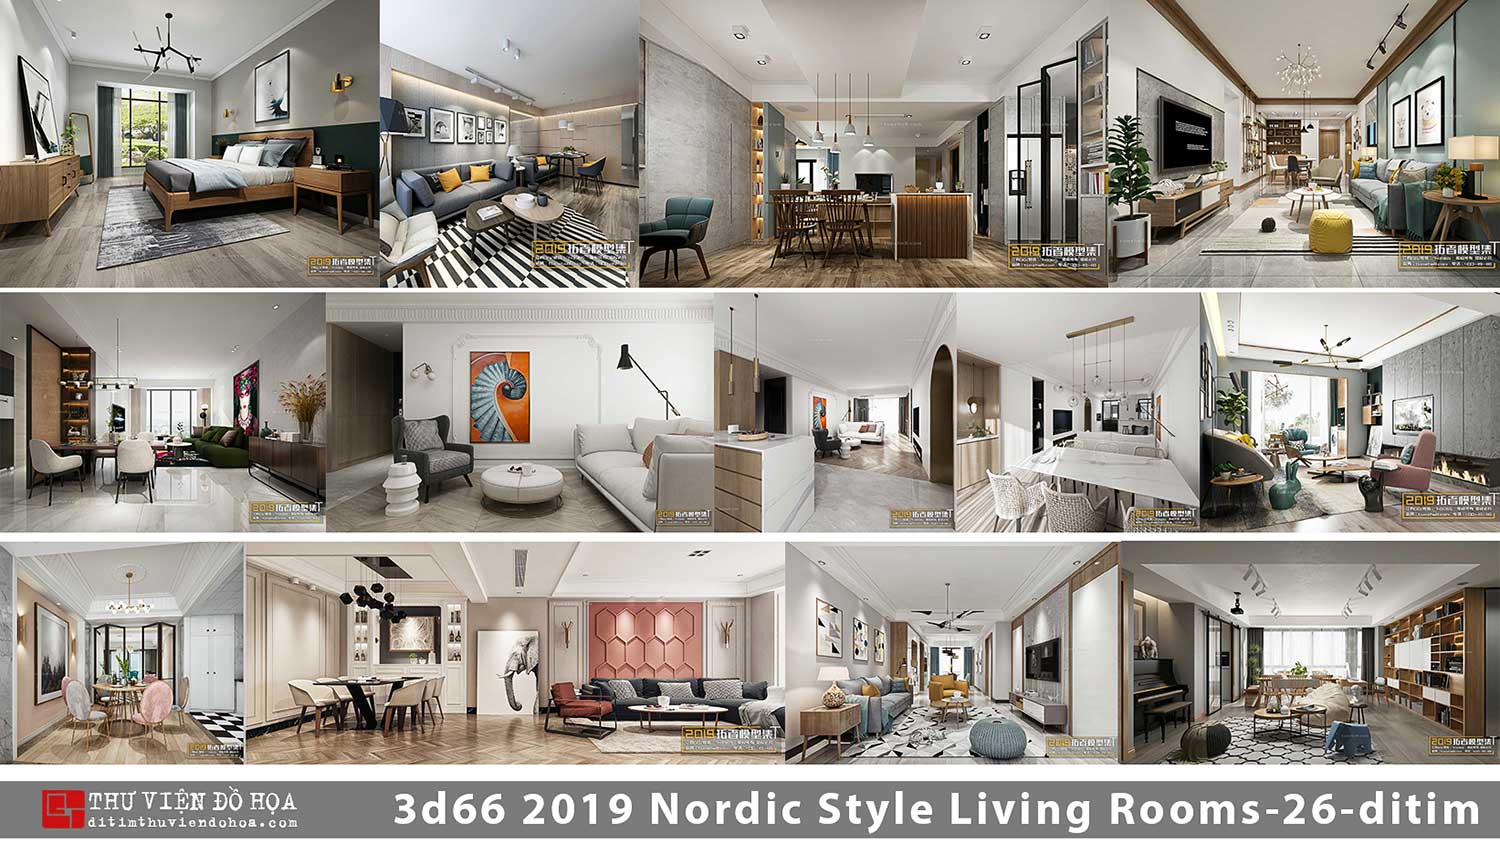 3d66 2019 Nordic Style Living Rooms-26-ditim